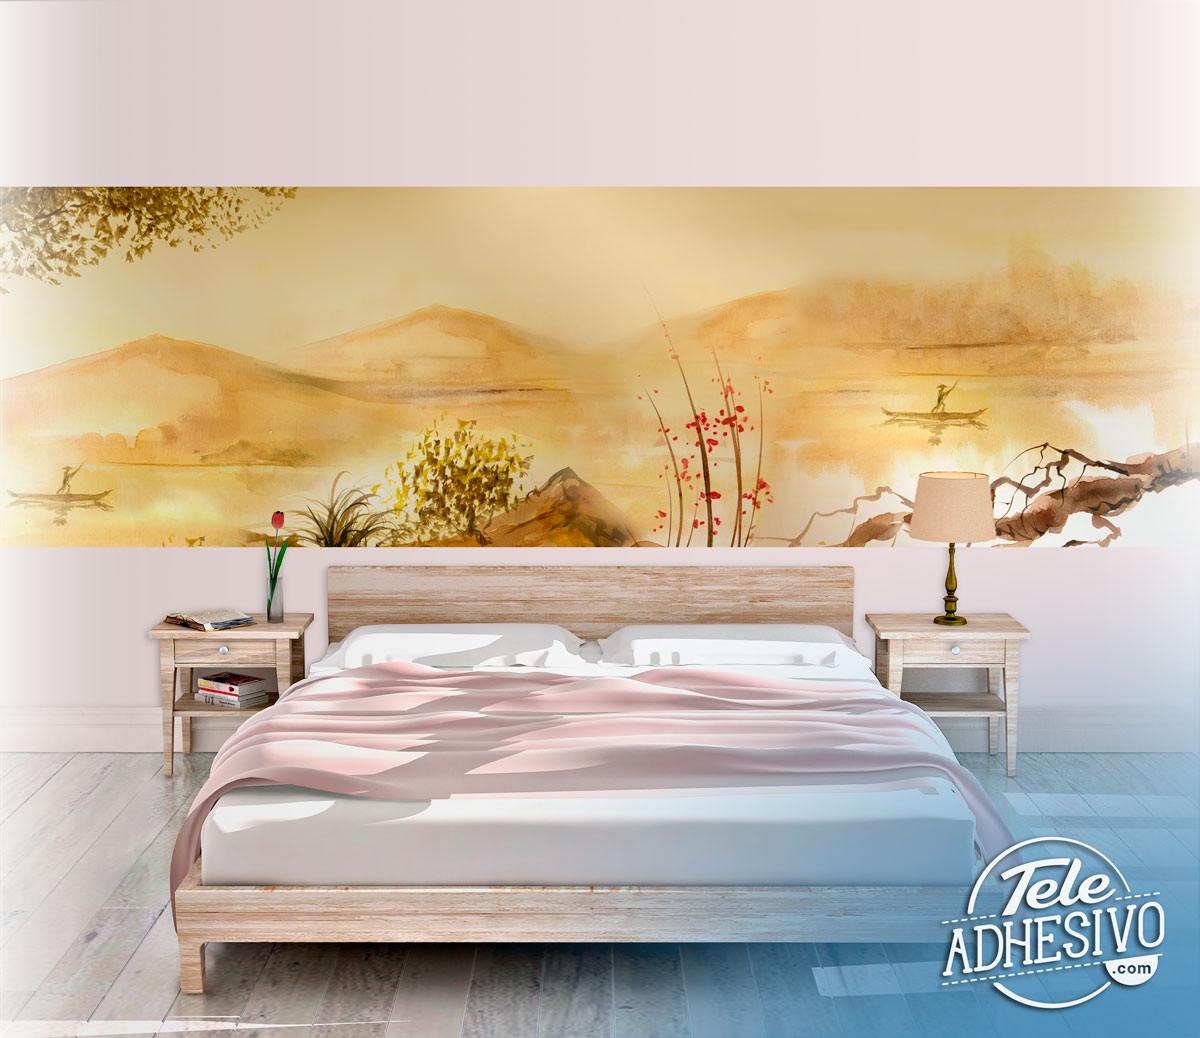 Wall Murals: Landscape painting